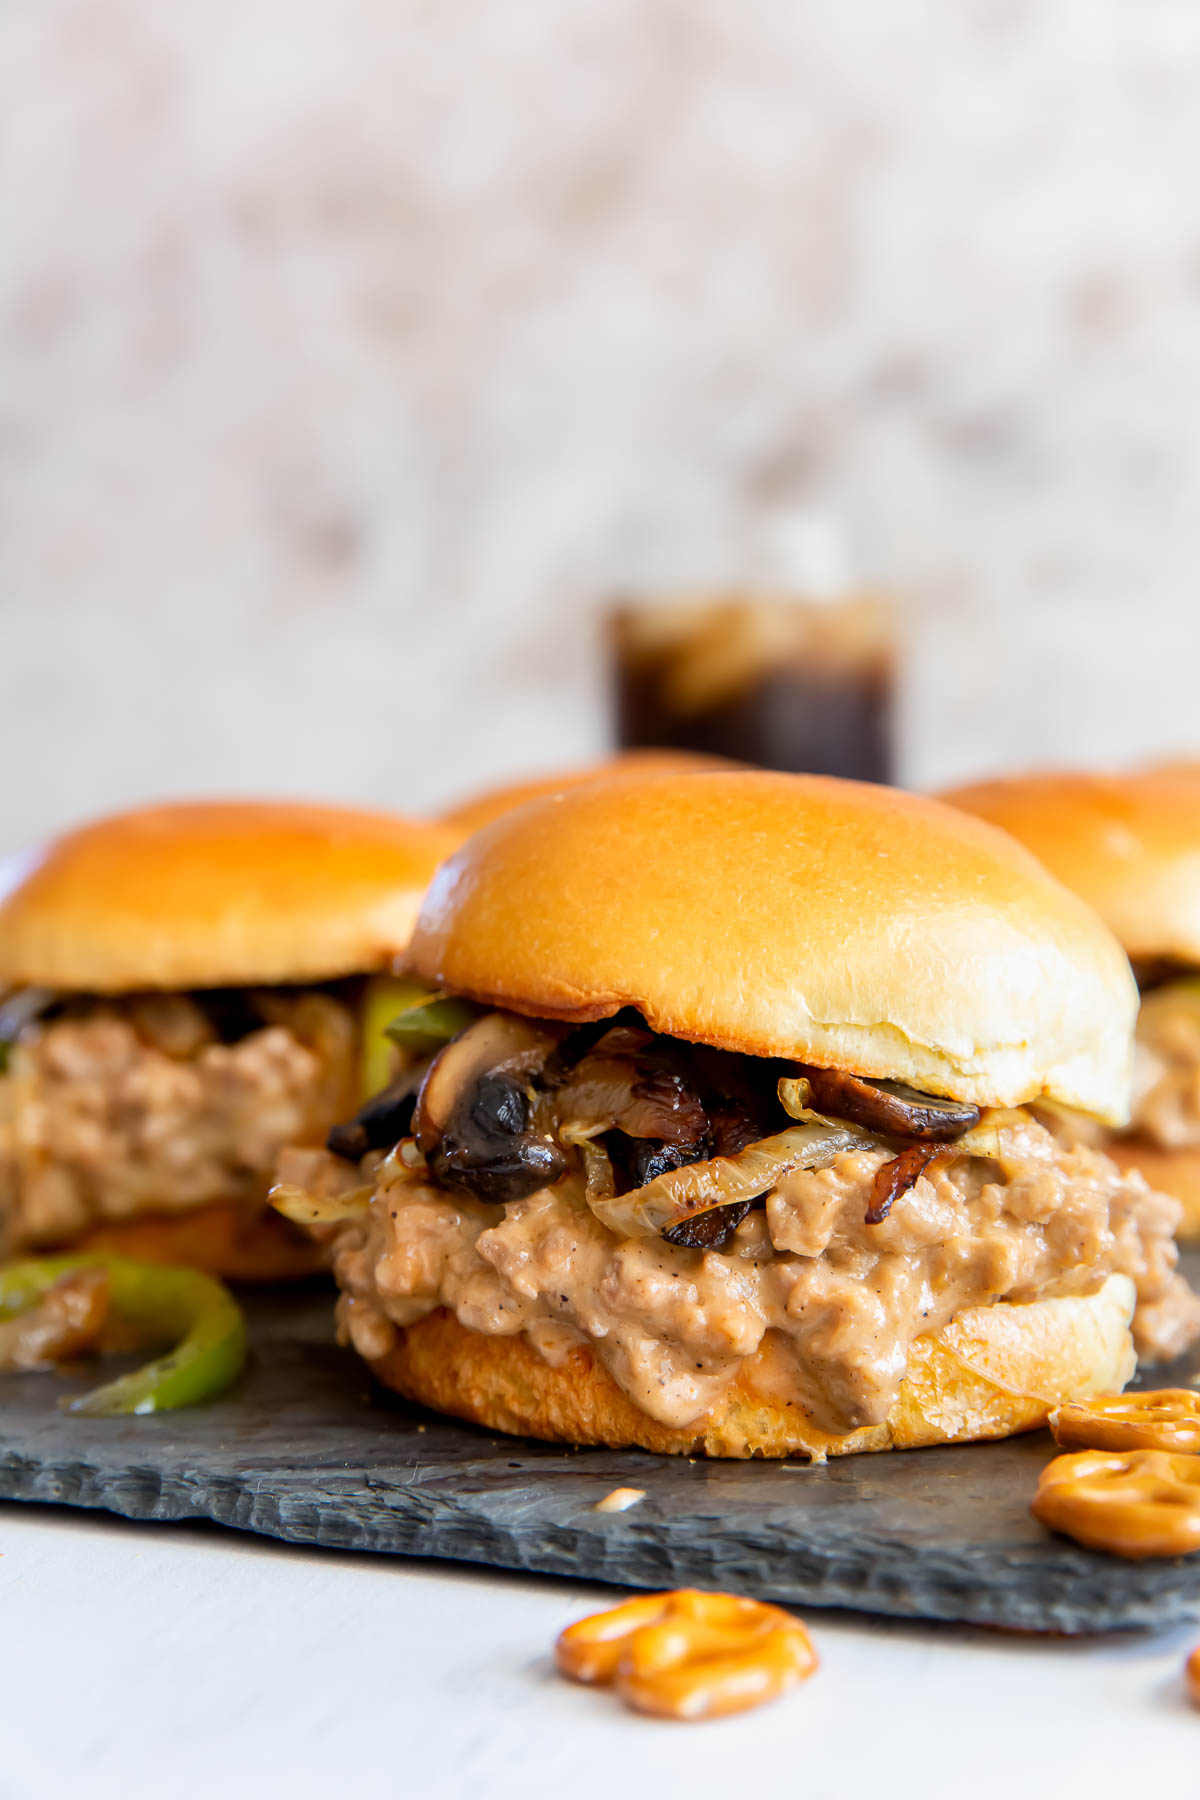 Philly Sloppy Joes sandwiches.